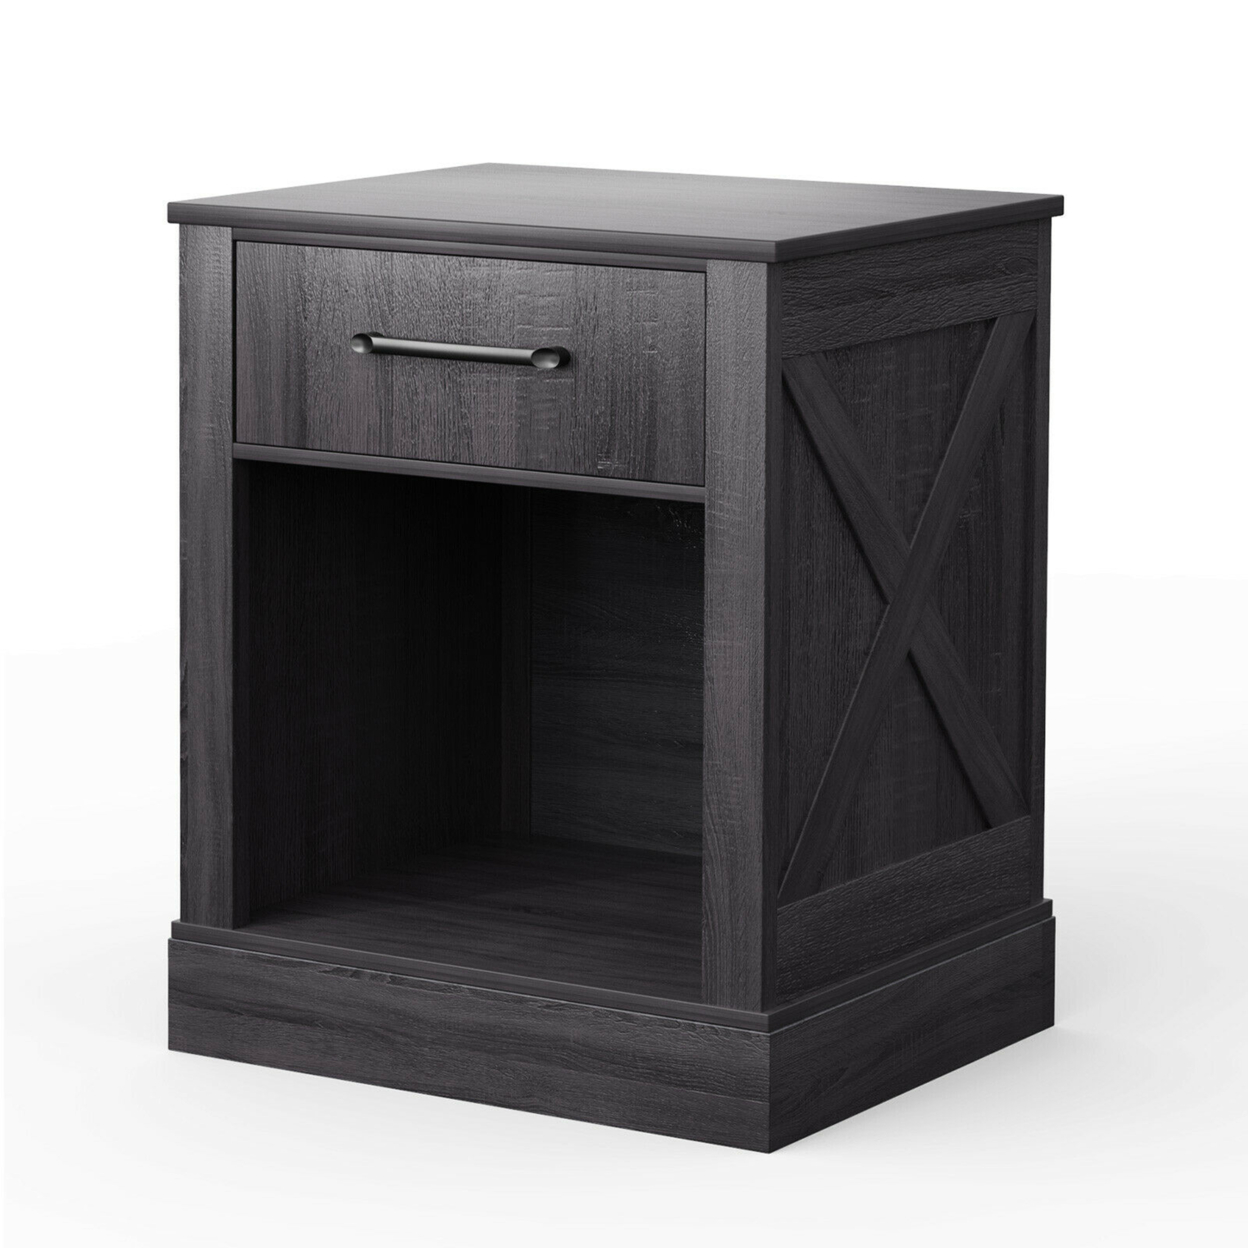 Nightstand With Drawer And Shelf Rustic Wooden Bedside Table Bedroom Brown / Natural / Black - Black